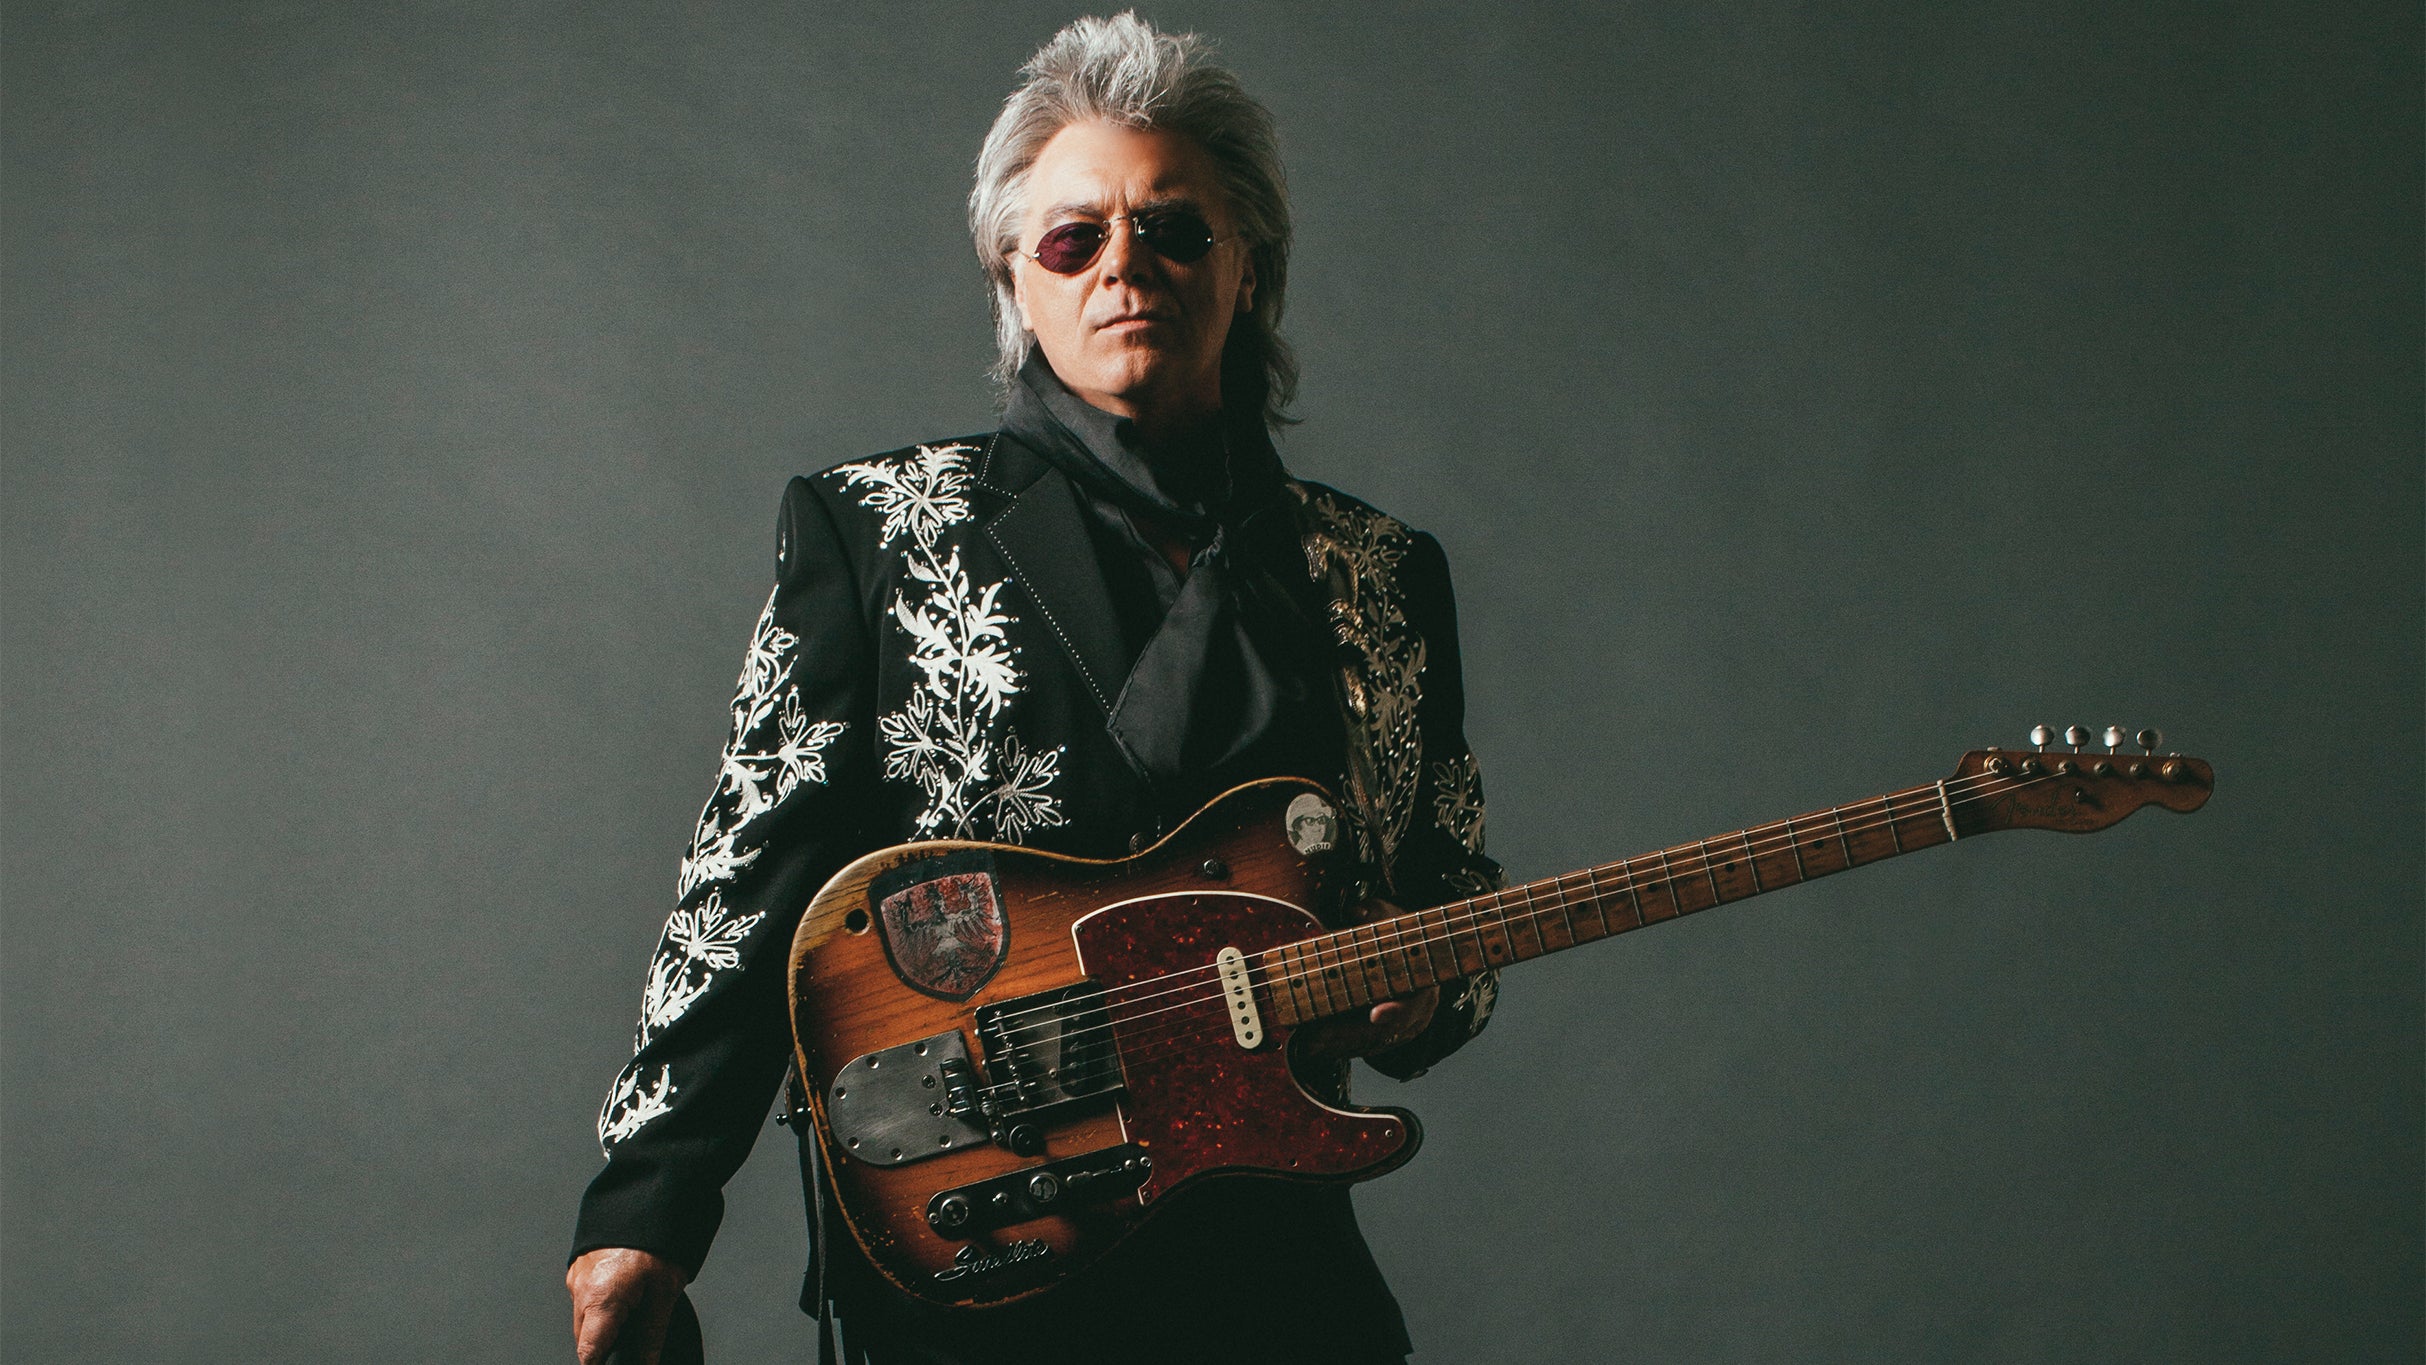 Marty Stuart at The District - Sioux Falls, SD 57106